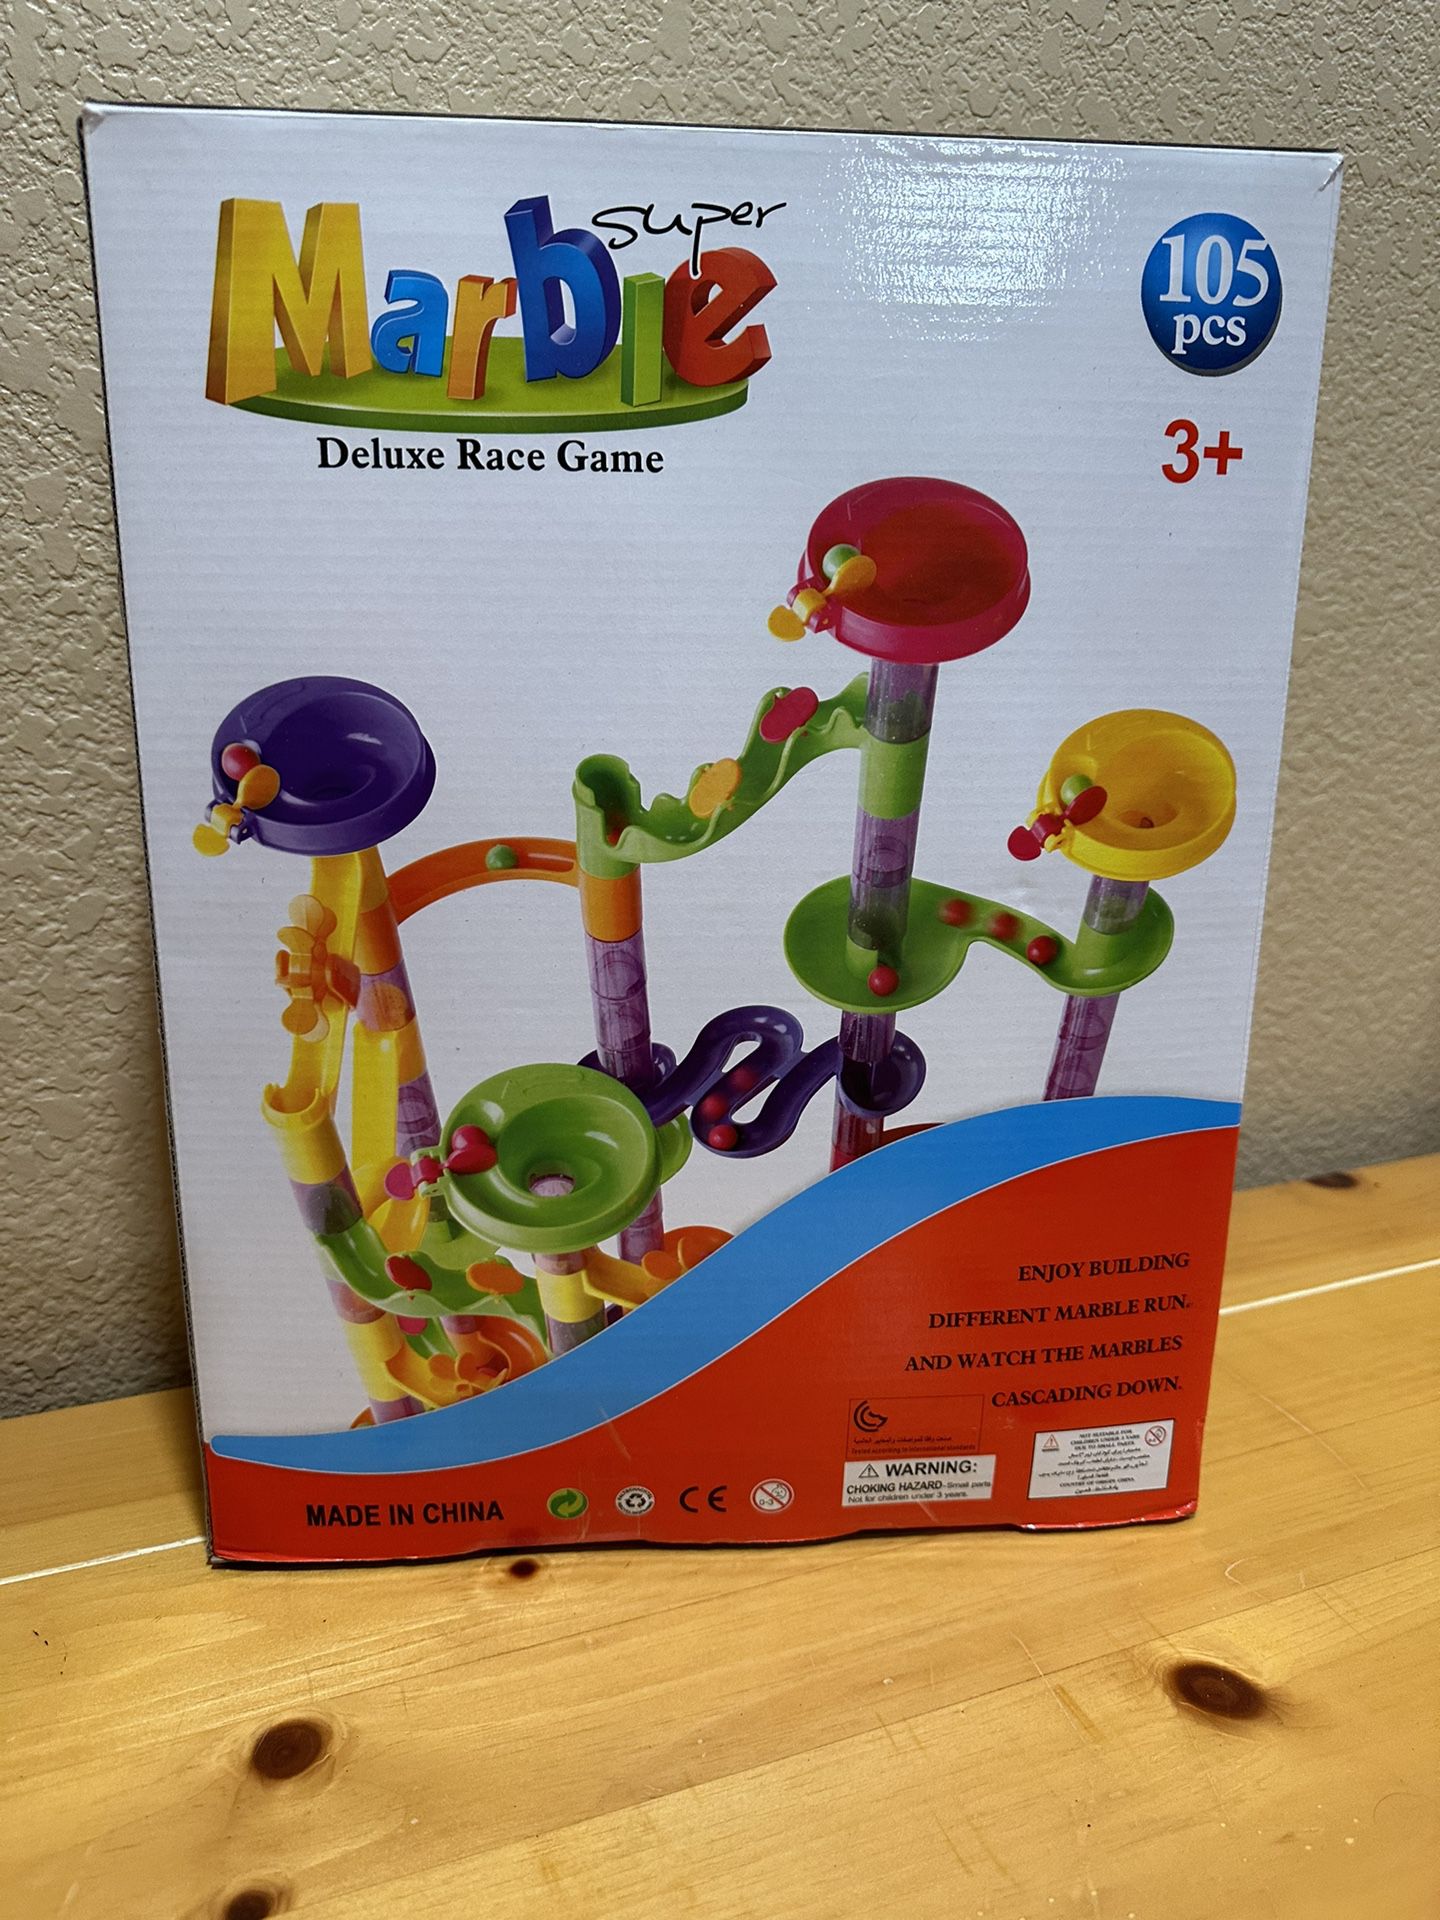 Super Marble Deluxe Race Game